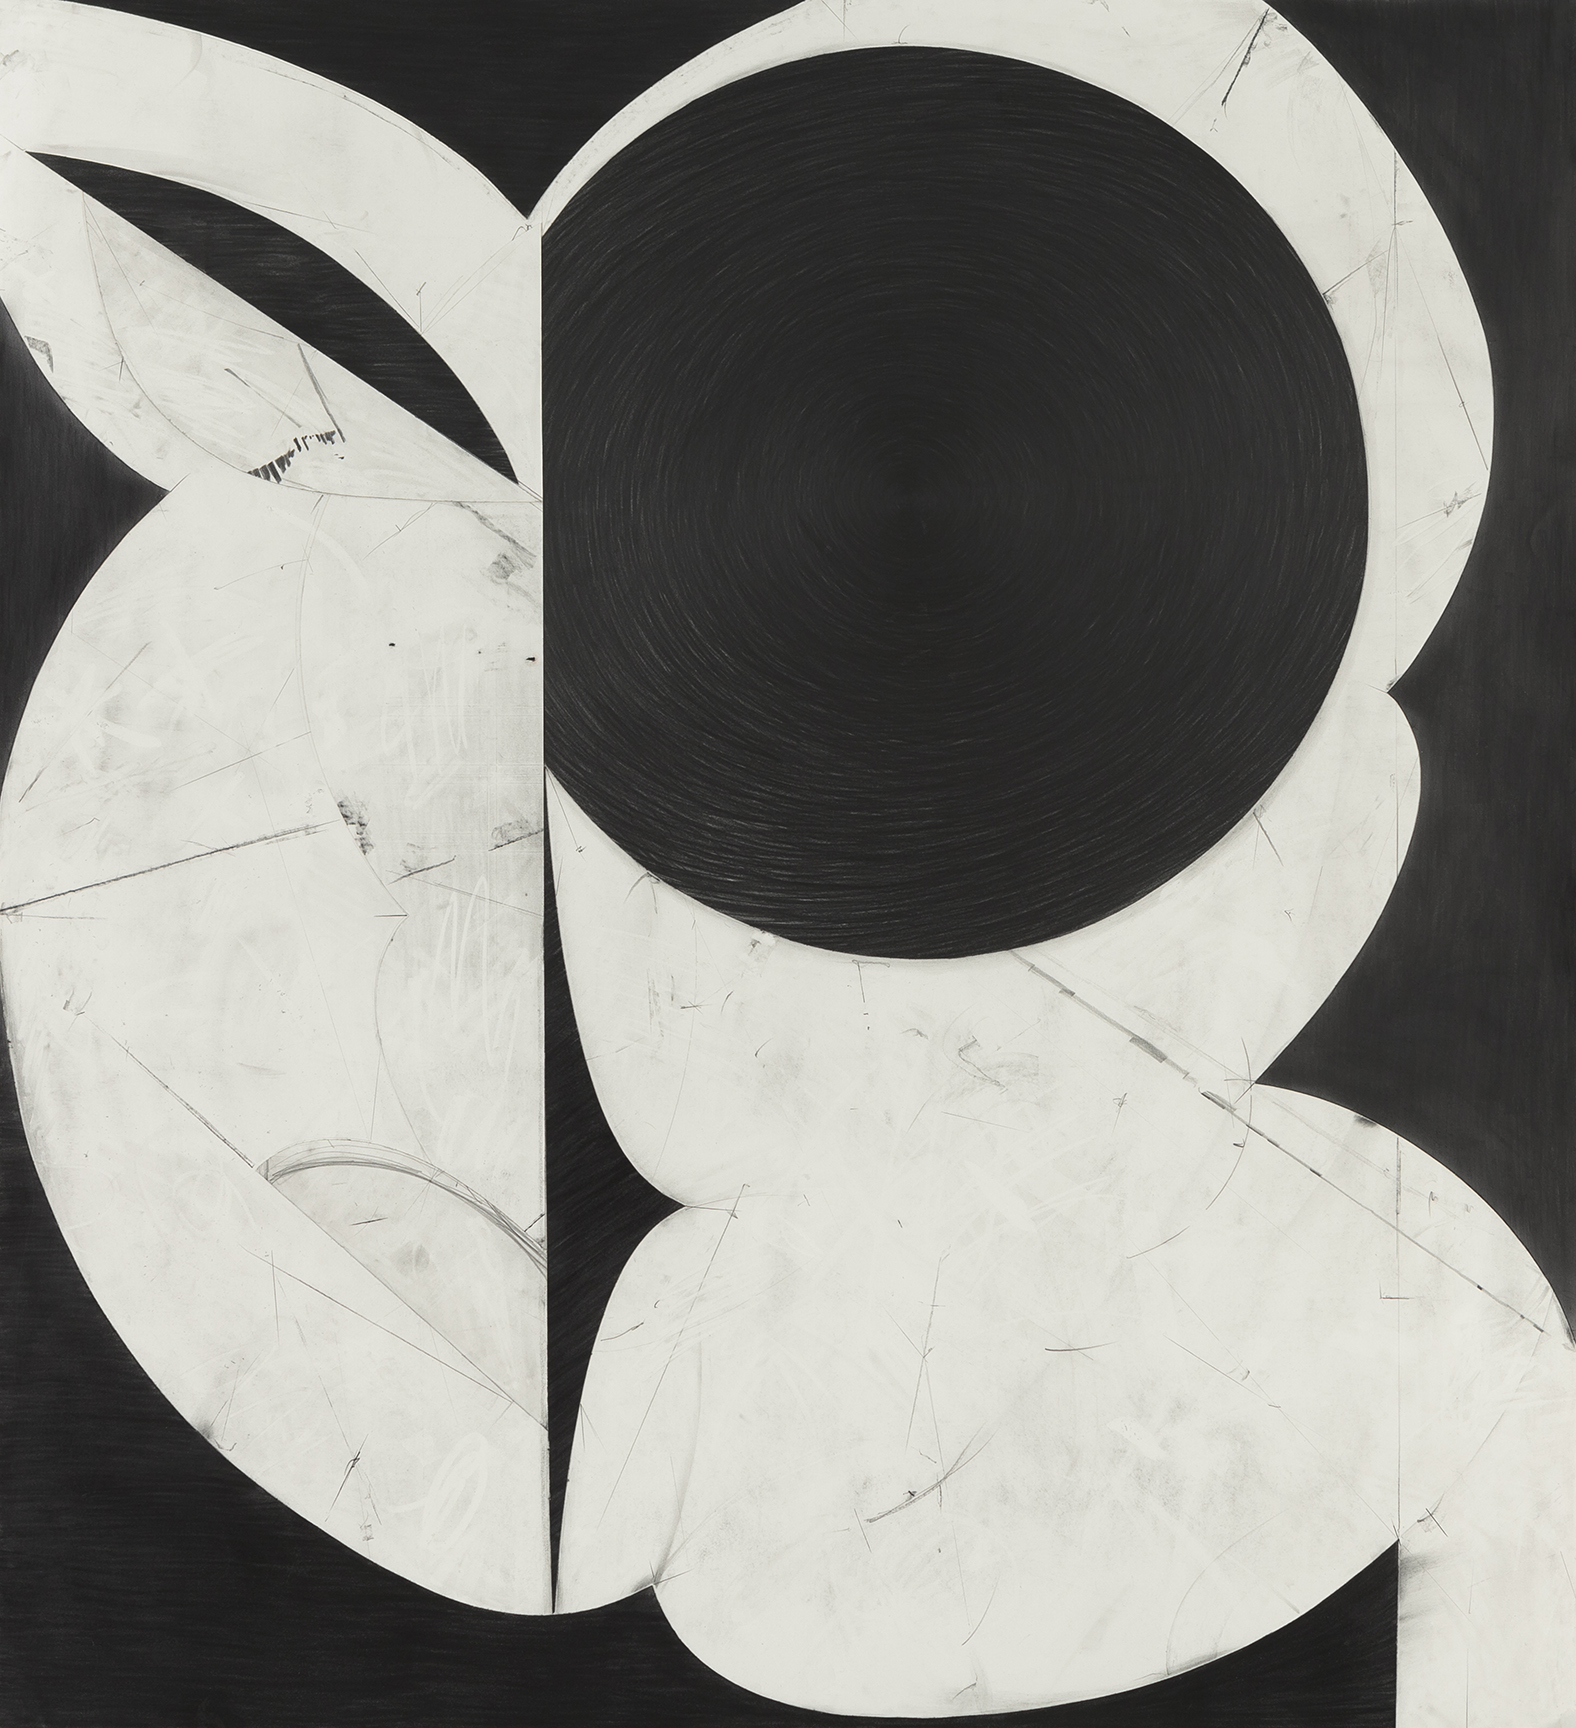 Javier_Romero-10_Untitled_2014_Graphite_on_cut_and_collaged_paper